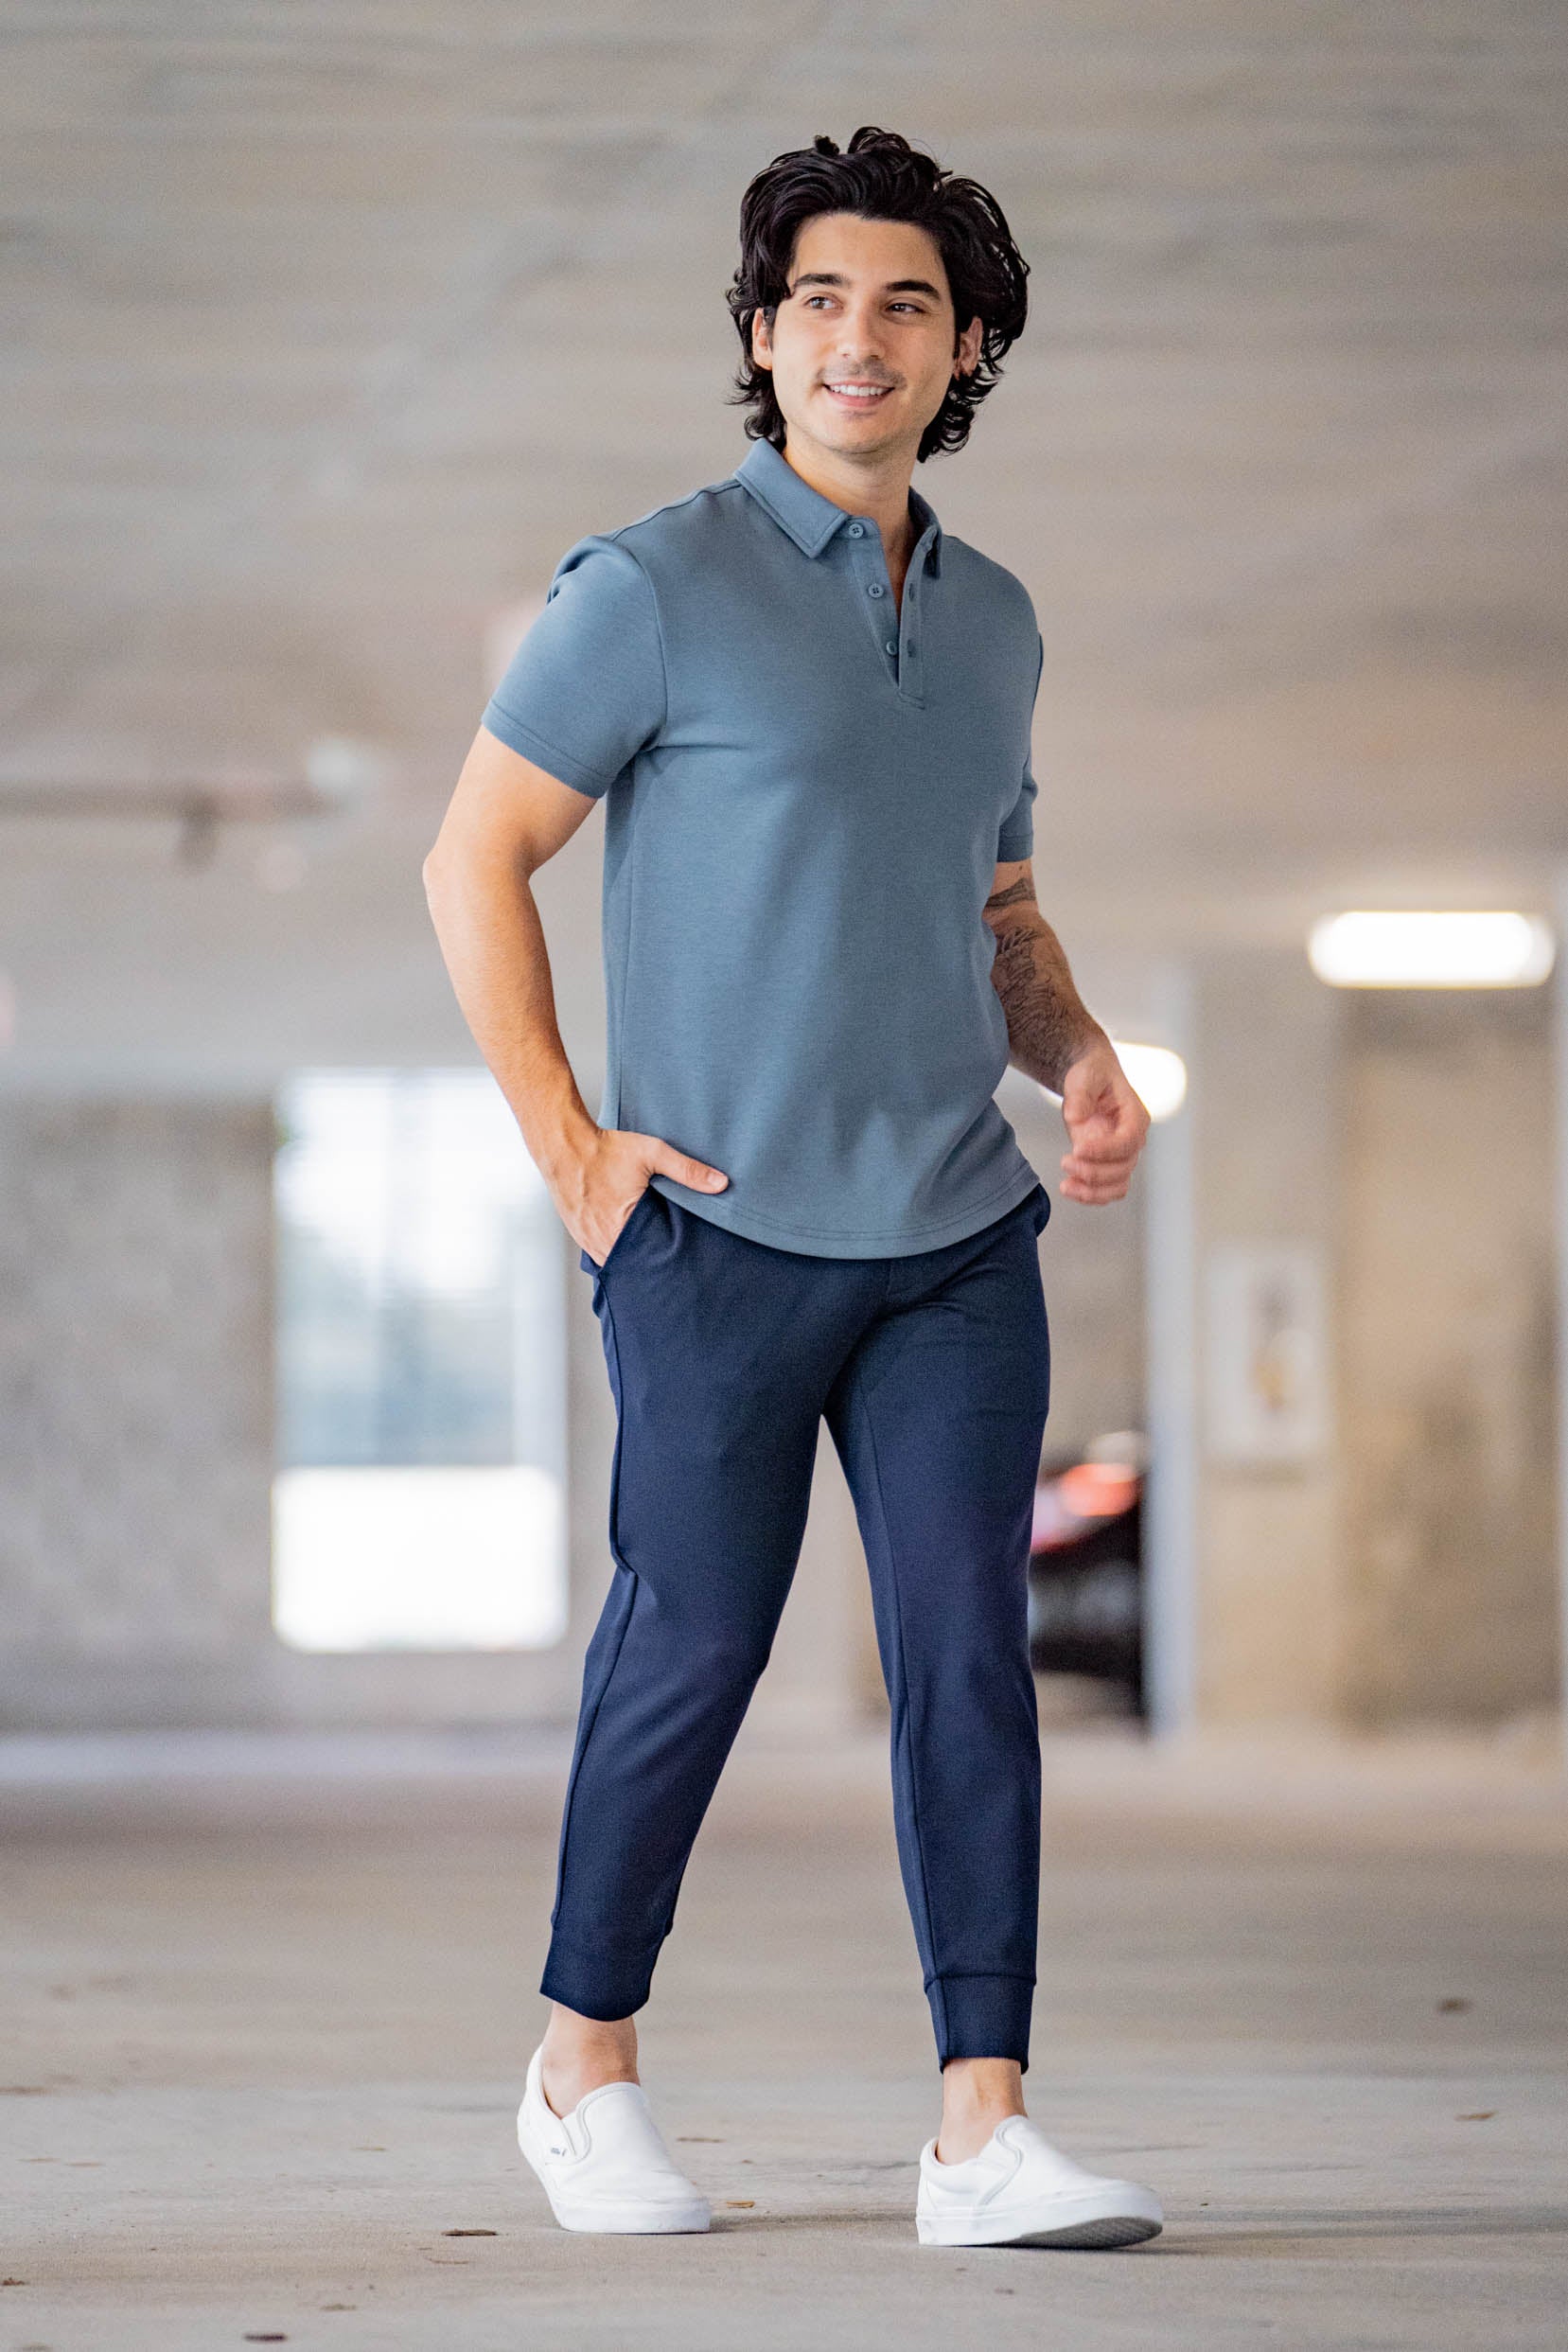 mens blue dress pants outfit for sale, OFF 66%